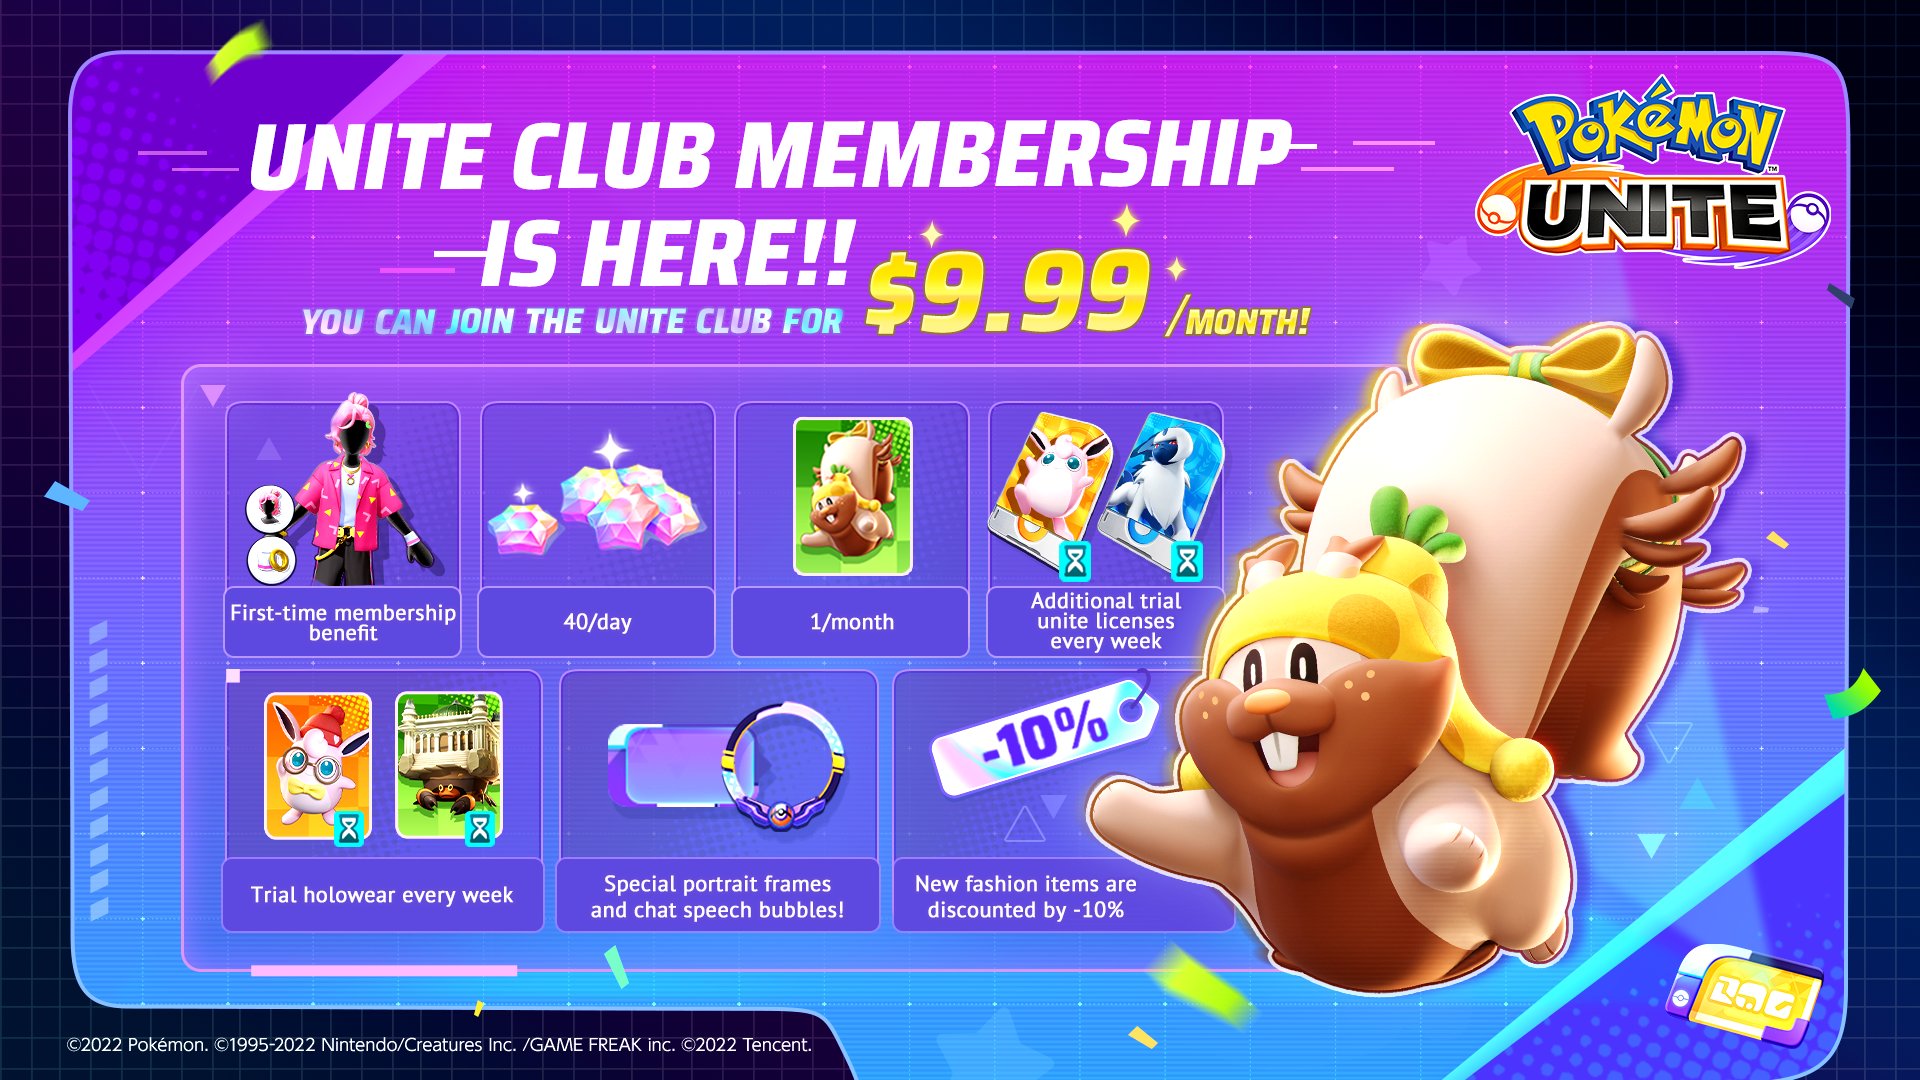 ‘Pokemon Unite’ UNITE Club Membership Now Available for $10 a Month Including Daily Rewards, Members-Only Discounts, and More